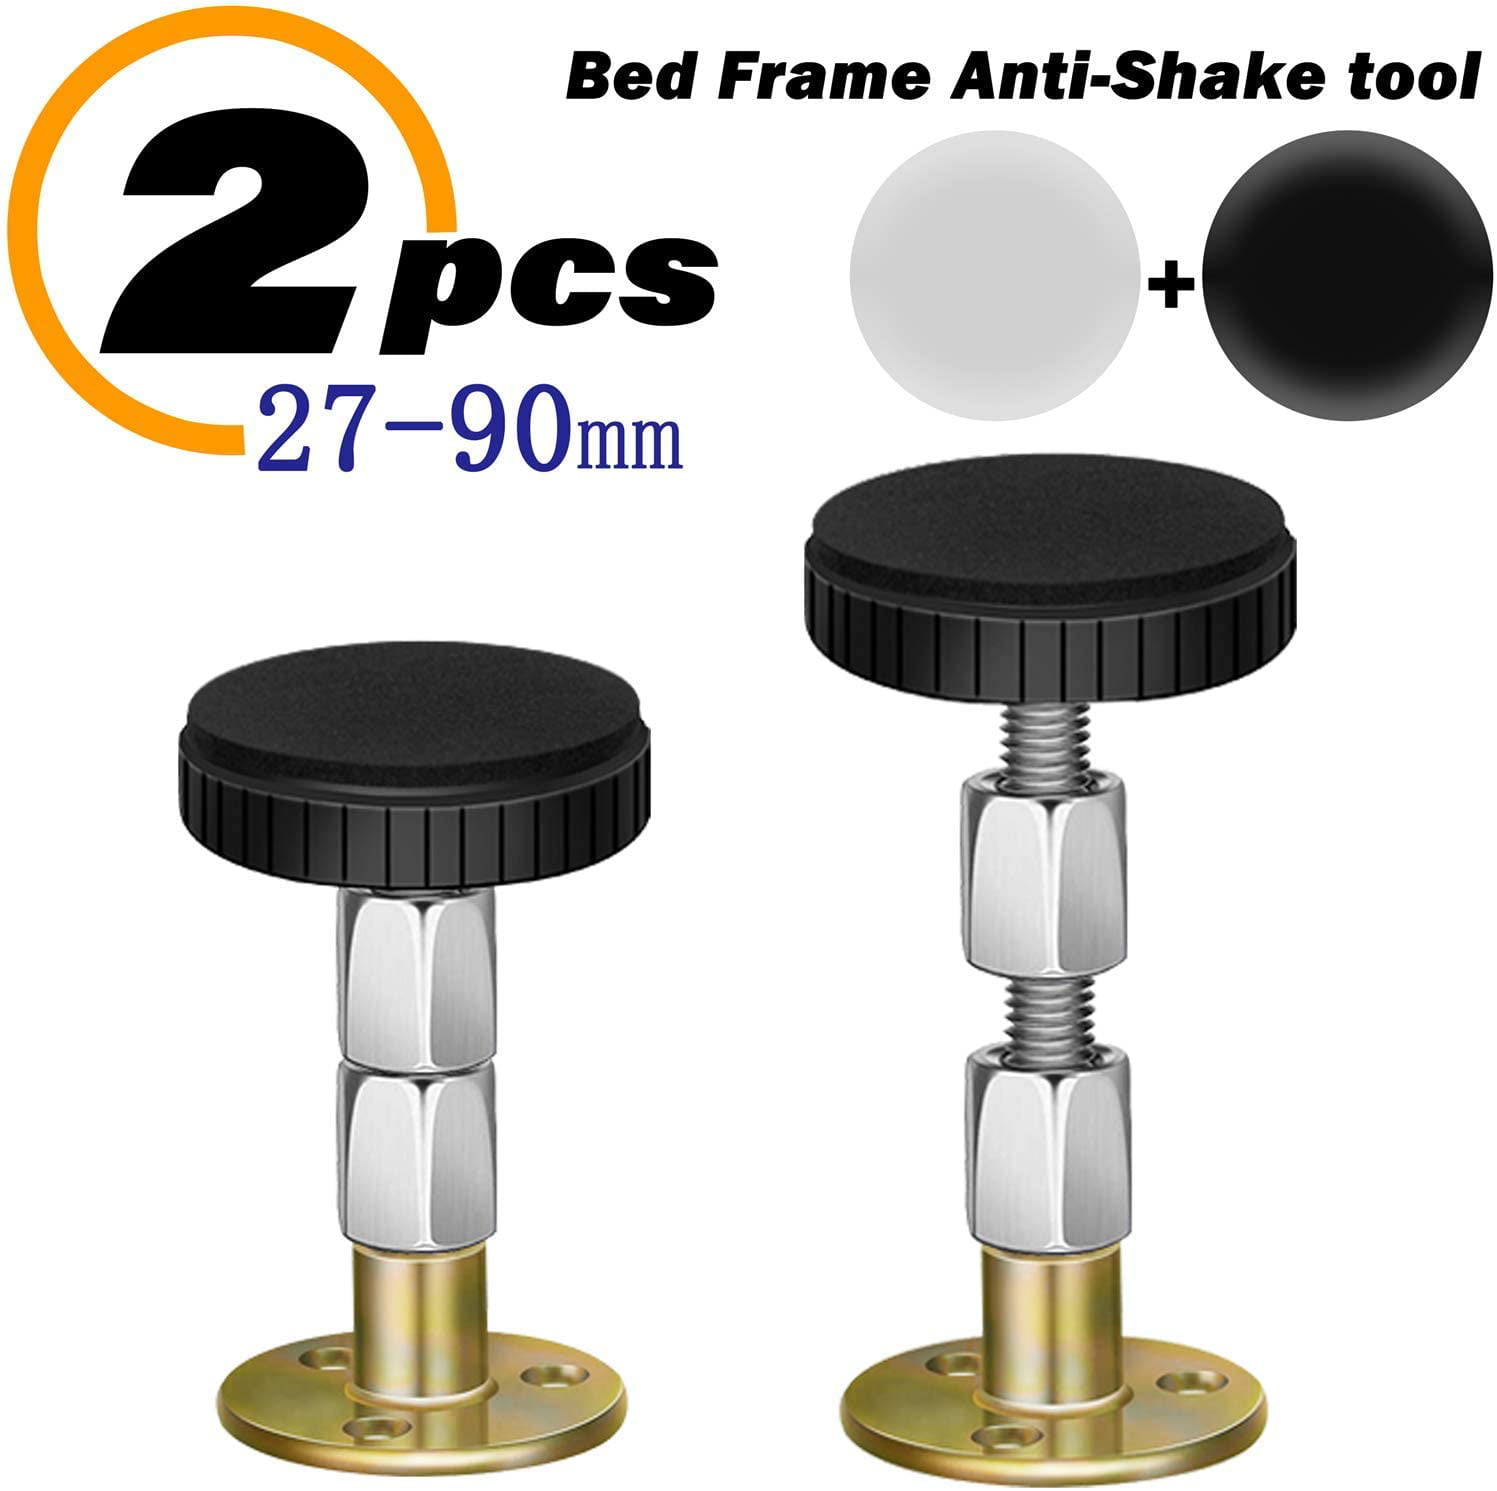 2 Pack Adjustable Threaded Bed Frame Anti-shake Tool For Bed Headboard Stoppers 